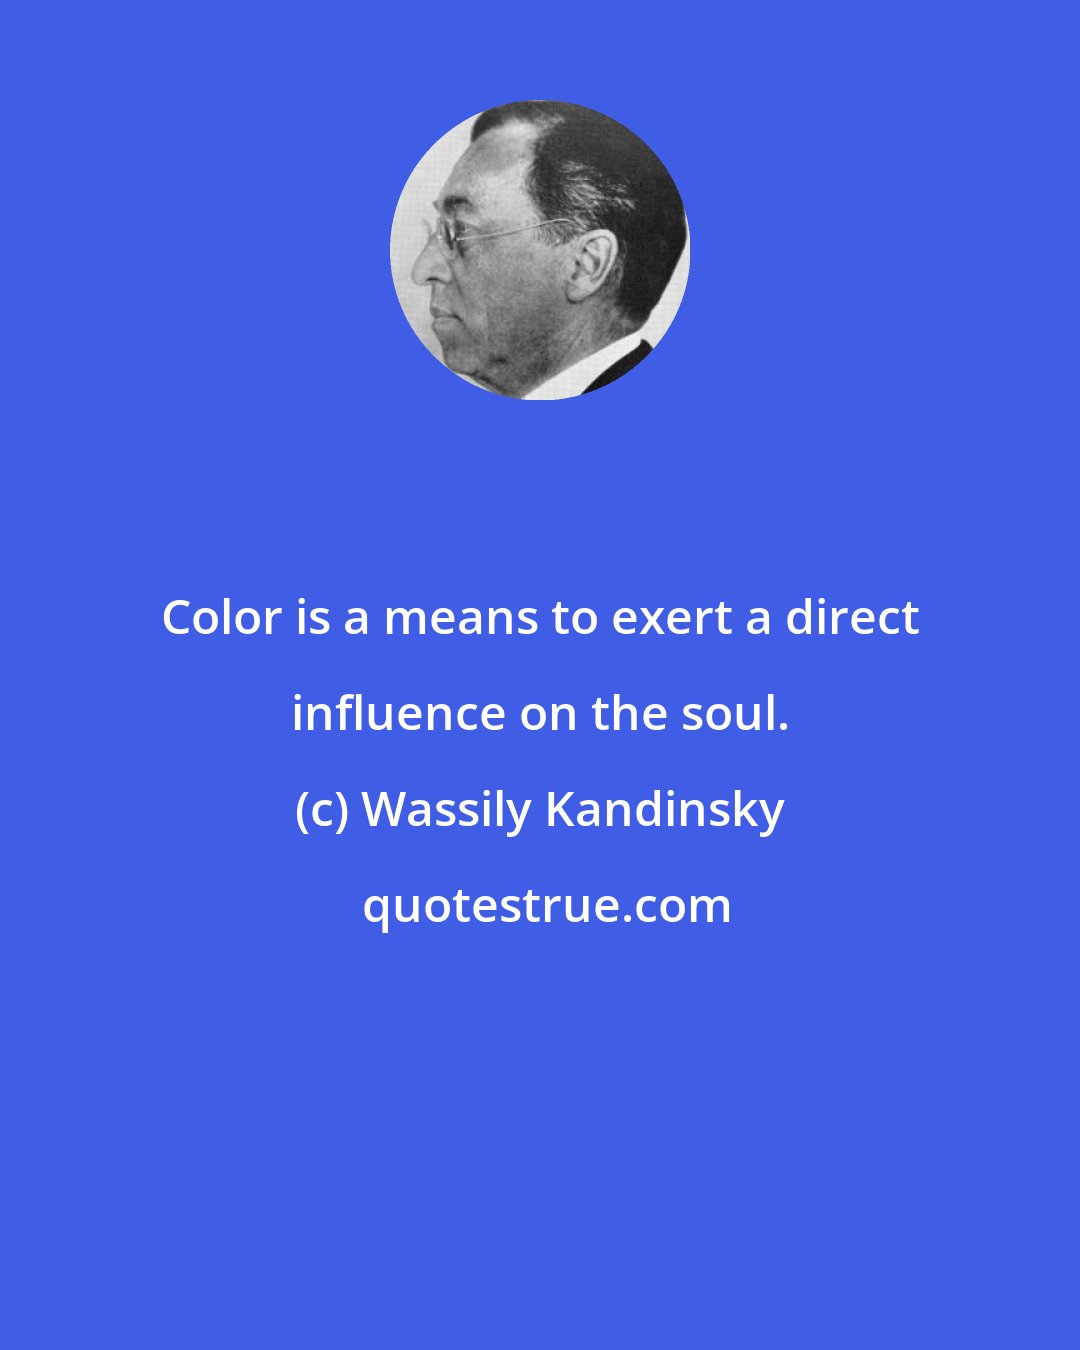 Wassily Kandinsky: Color is a means to exert a direct influence on the soul.